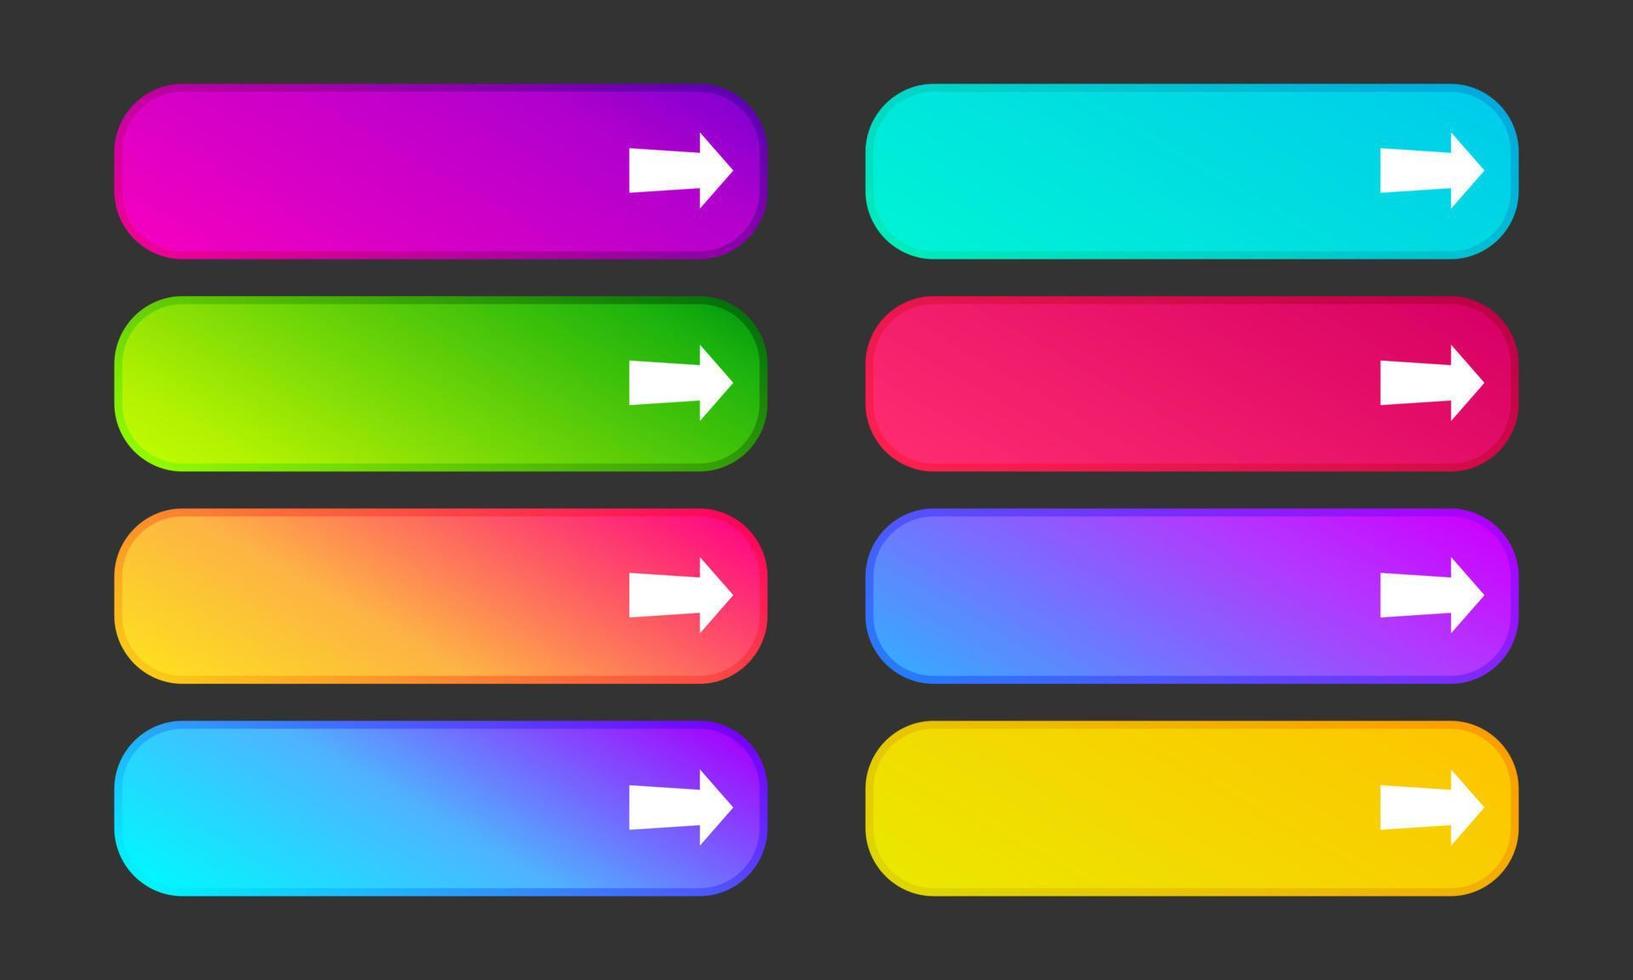 Colorful gradient buttons with arrows. Set of eight modern abstract web buttons. Vector illustration